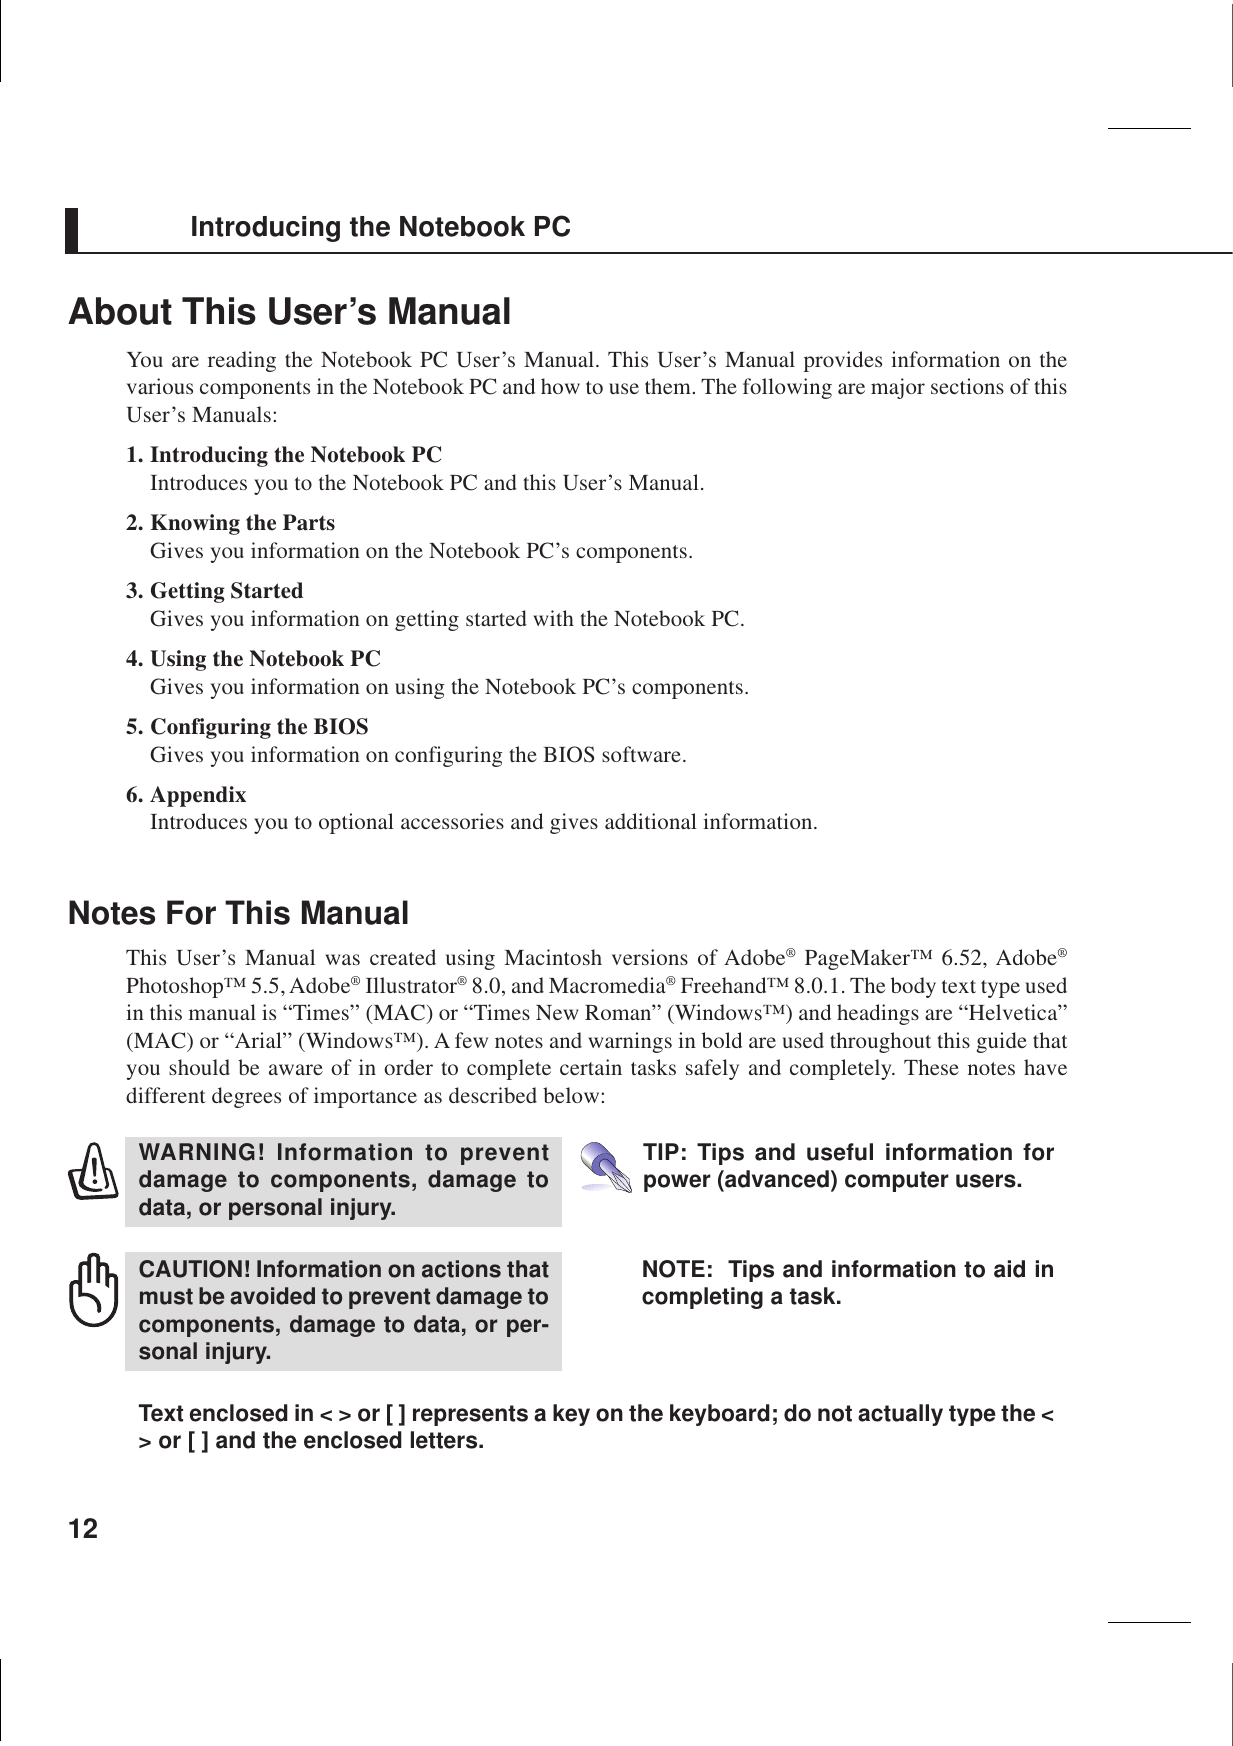 12About This User’s ManualYou are reading the Notebook PC User’s Manual. This User’s Manual provides information on thevarious components in the Notebook PC and how to use them. The following are major sections of thisUser’s Manuals:1. Introducing the Notebook PCIntroduces you to the Notebook PC and this User’s Manual.2. Knowing the PartsGives you information on the Notebook PC’s components.3. Getting StartedGives you information on getting started with the Notebook PC.4. Using the Notebook PCGives you information on using the Notebook PC’s components.5. Configuring the BIOSGives you information on configuring the BIOS software.6. AppendixIntroduces you to optional accessories and gives additional information.Notes For This ManualThis User’s Manual was created using Macintosh versions of Adobe® PageMaker™ 6.52, Adobe®Photoshop™ 5.5, Adobe® Illustrator® 8.0, and Macromedia® Freehand™ 8.0.1. The body text type usedin this manual is “Times” (MAC) or “Times New Roman” (Windows™) and headings are “Helvetica”(MAC) or “Arial” (Windows™). A few notes and warnings in bold are used throughout this guide thatyou should be aware of in order to complete certain tasks safely and completely. These notes havedifferent degrees of importance as described below:Text enclosed in &lt; &gt; or [ ] represents a key on the keyboard; do not actually type the &lt;&gt; or [ ] and the enclosed letters.TIP: Tips and useful information forpower (advanced) computer users.NOTE:  Tips and information to aid incompleting a task.WARNING! Information to preventdamage to components, damage todata, or personal injury.CAUTION! Information on actions thatmust be avoided to prevent damage tocomponents, damage to data, or per-sonal injury.Introducing the Notebook PC